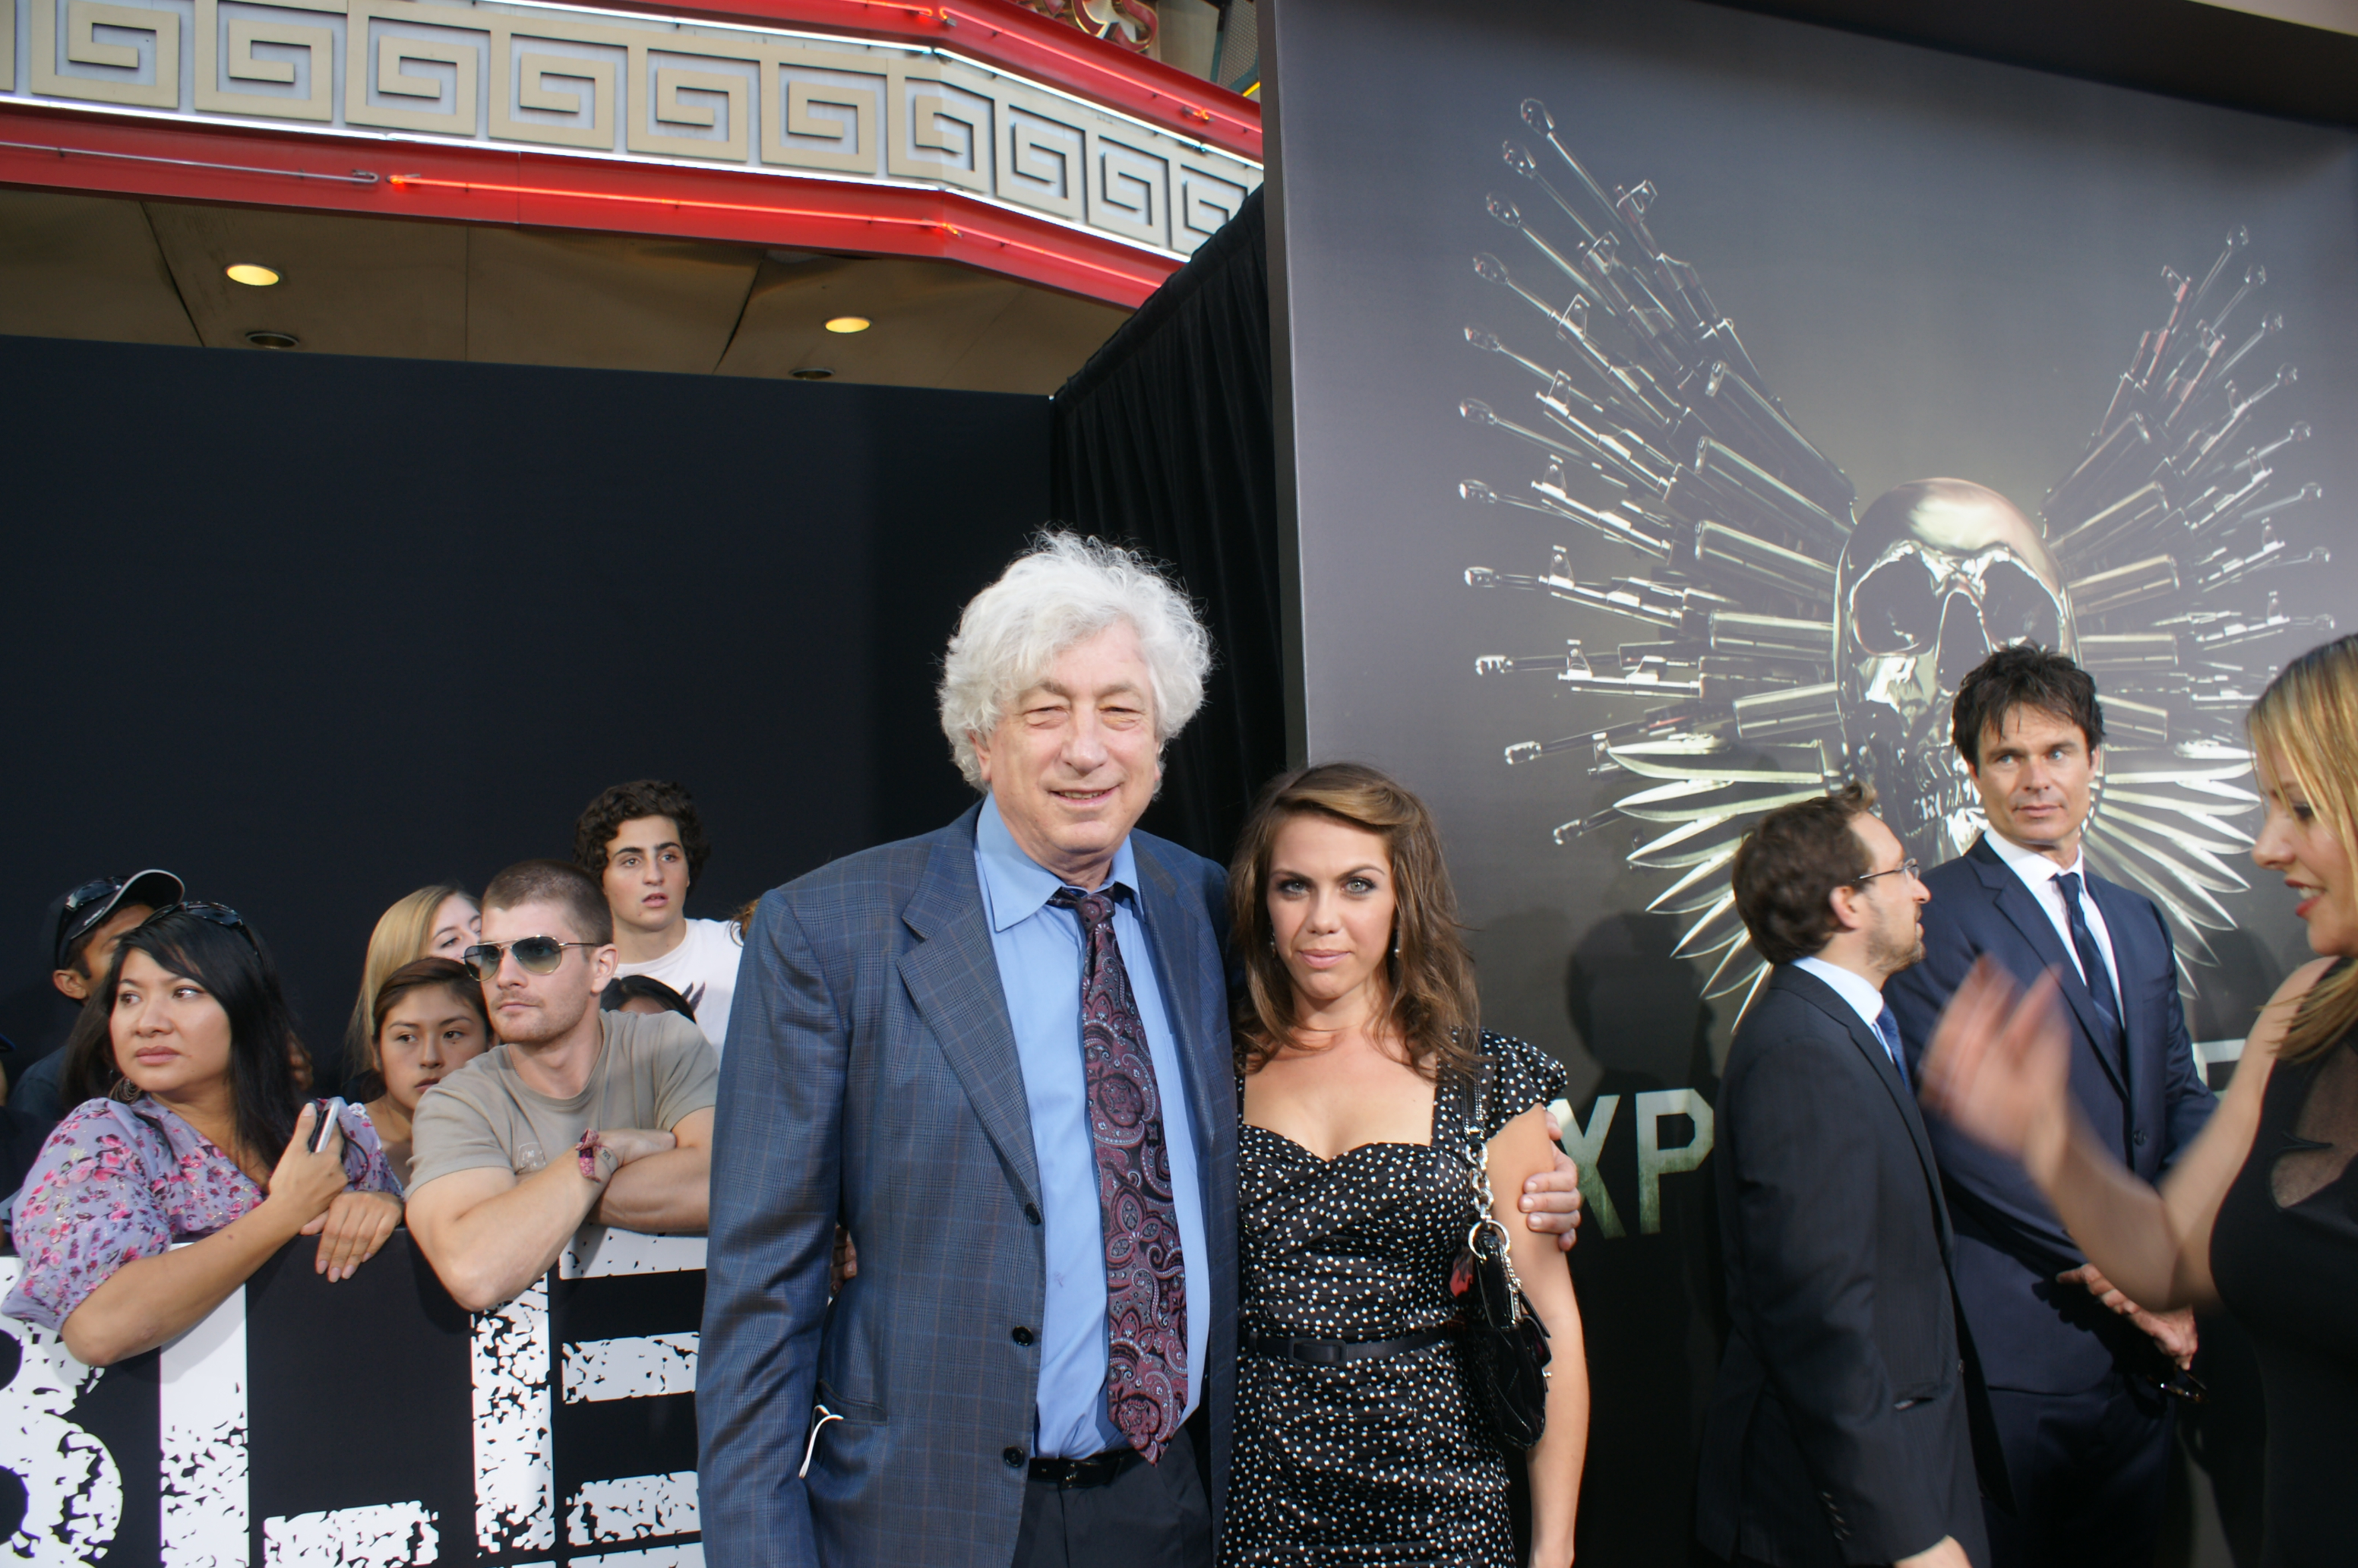 Avi Lerner and Marilyn Sheriff at the Expendables 2 premiere